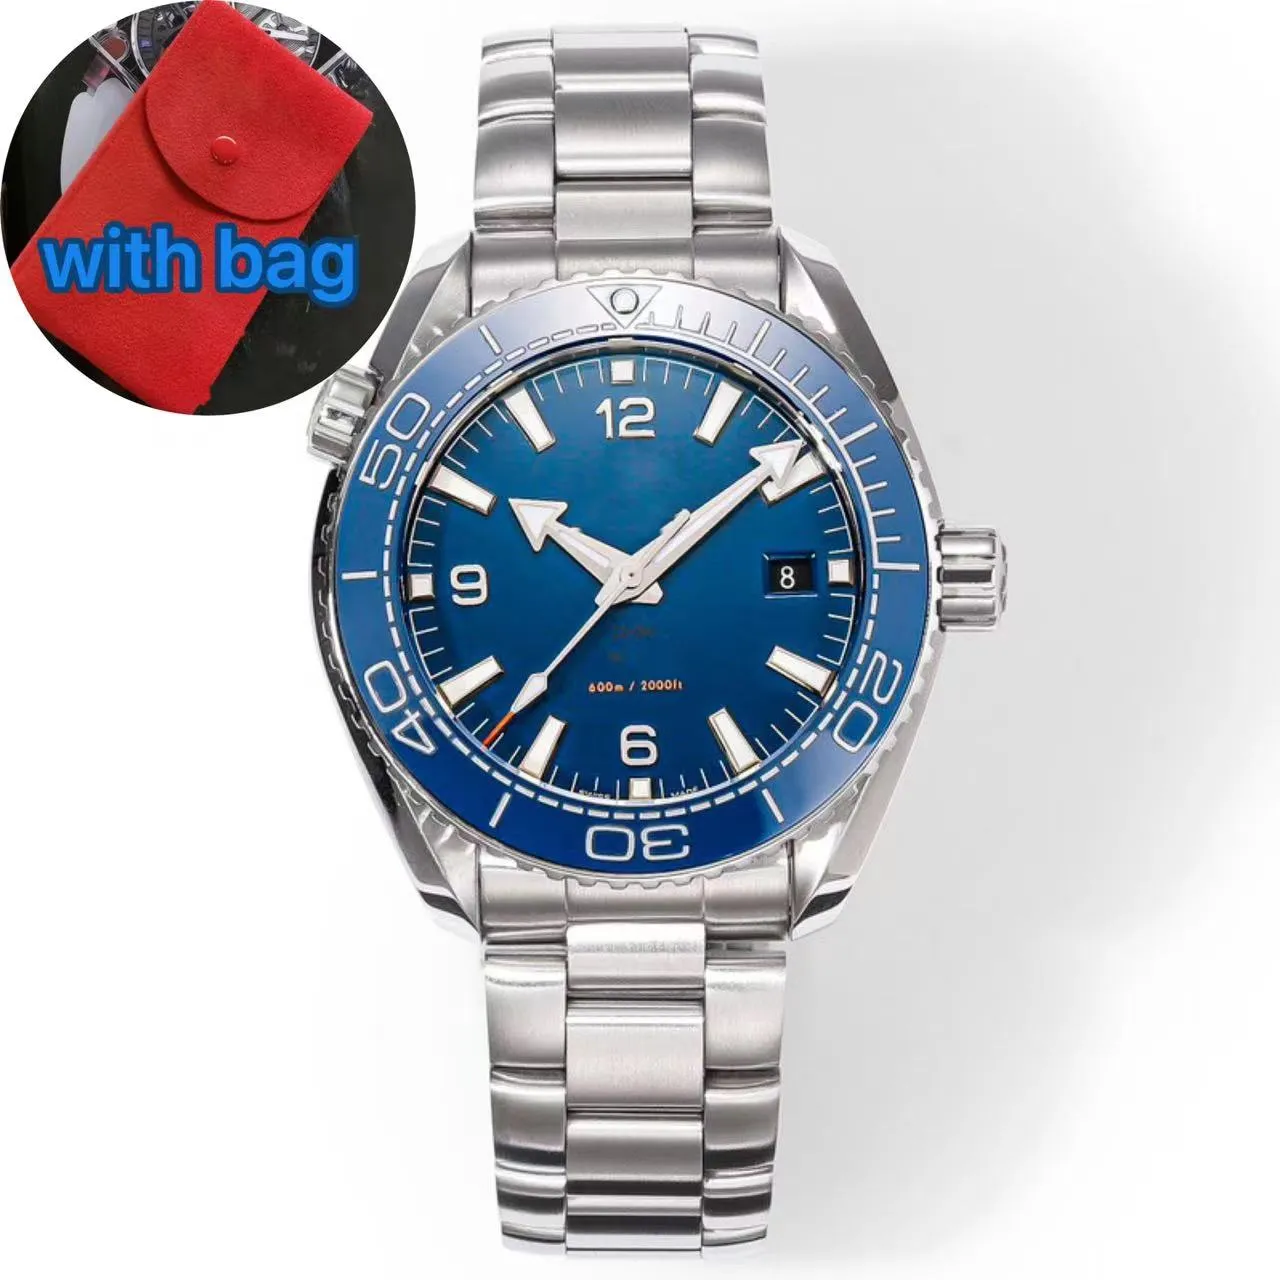 Luxury watch mens watch 43mm blue dial Ceramic Bezel omg 600m watches high quality Automatic Movement Sapphire waterproof Original relojes with bag montre de luxe